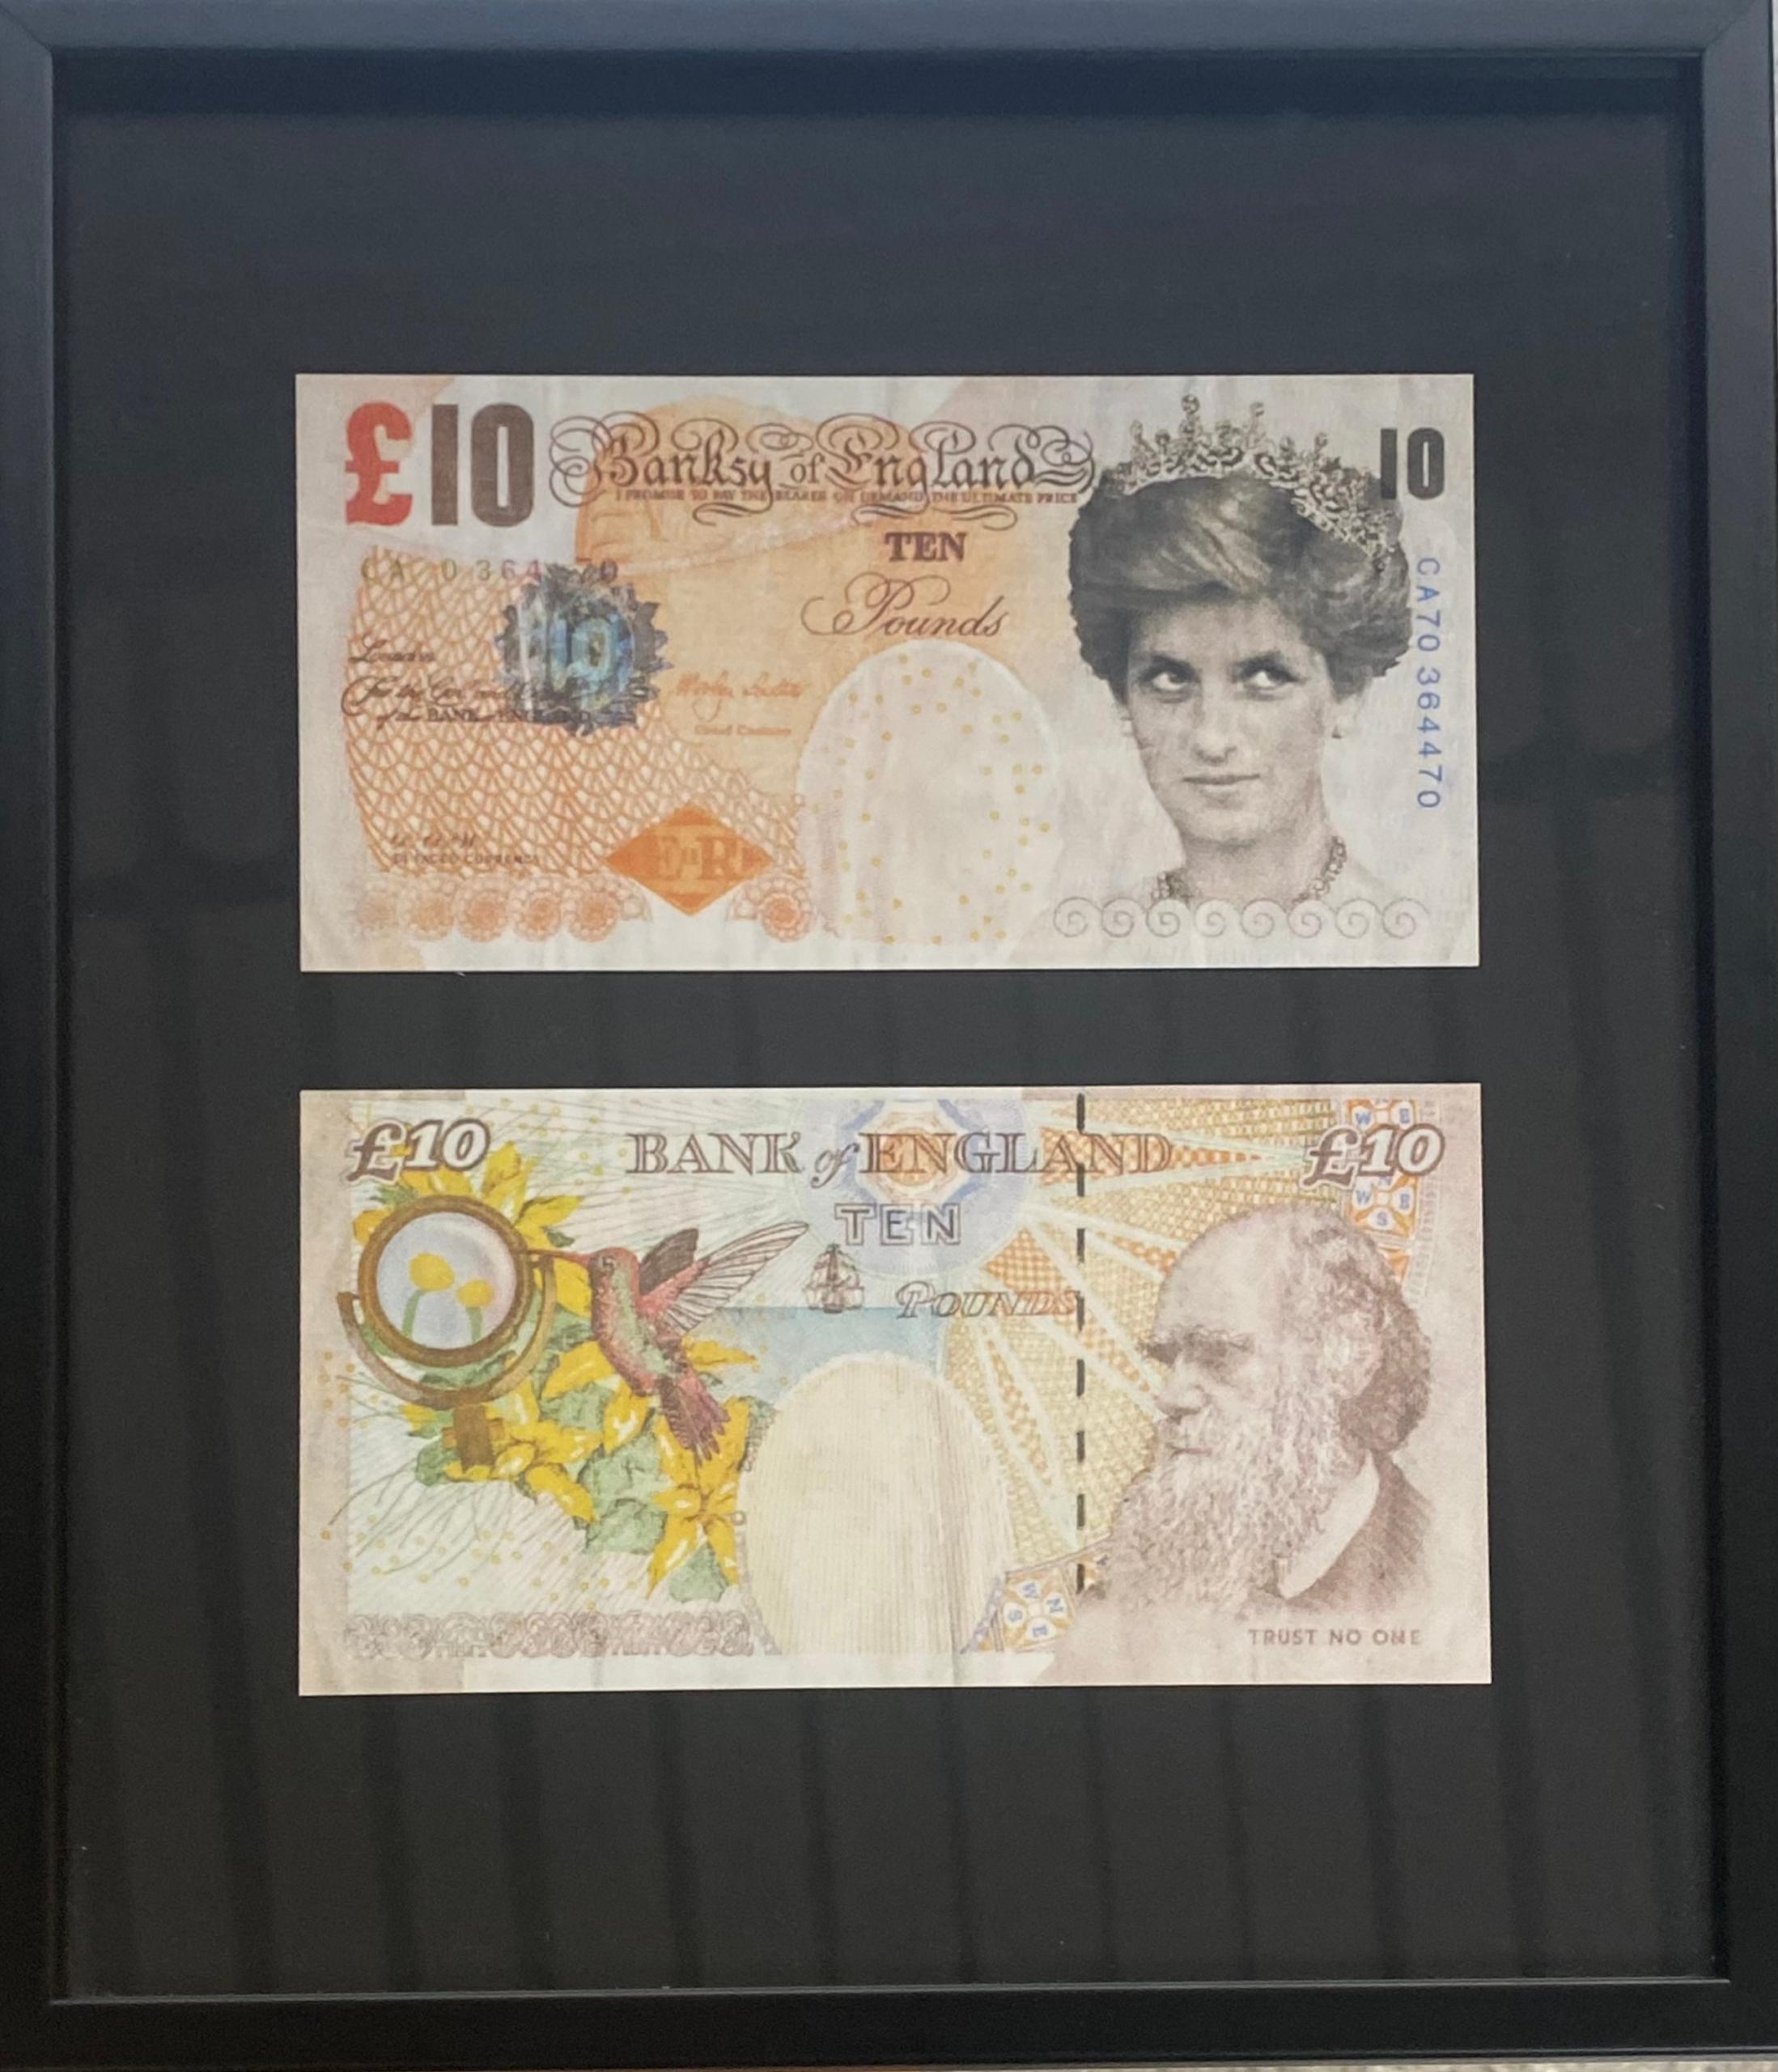 Banksy: Banksy (1974), after
Set of two Lady Di-faced tenner, a 10 pound note in the likeness of Lady Di issued by Banksy off England
This banknote was distributed to the participants of the Nothing Hill festival parade in 2004.
Size: framed